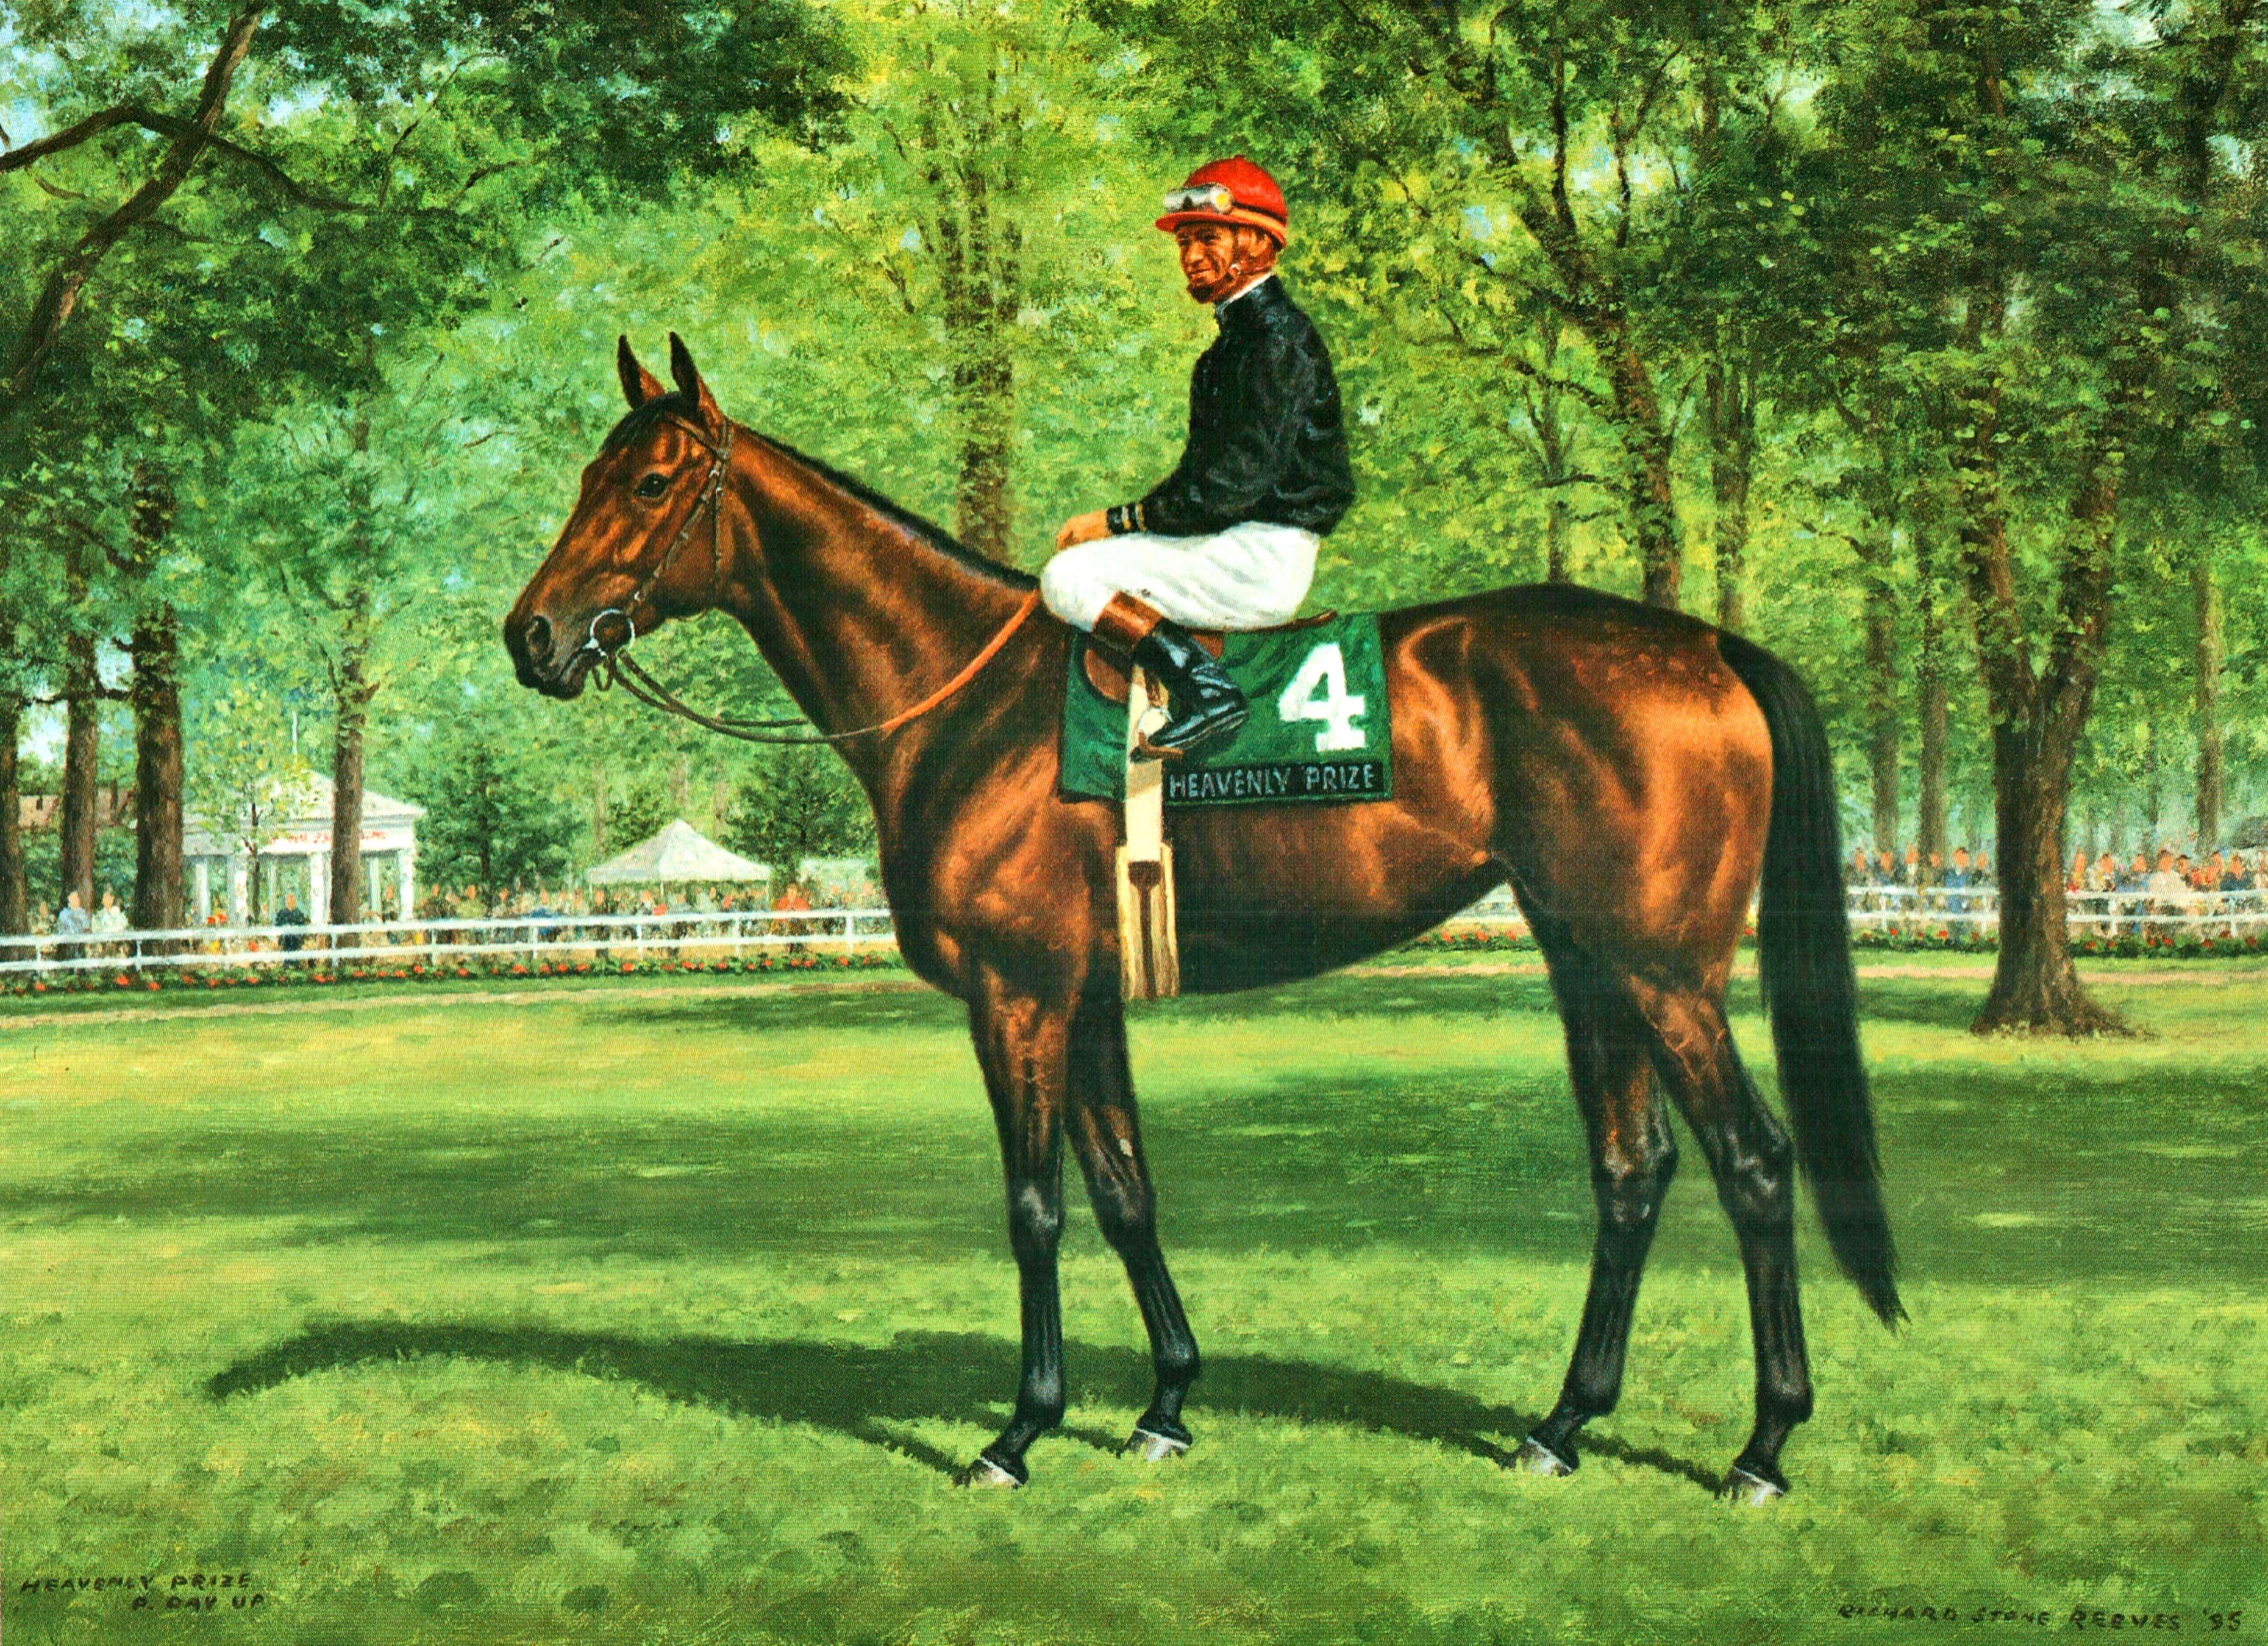 Painting of Heavenly Prize by Richard Stone Reeves